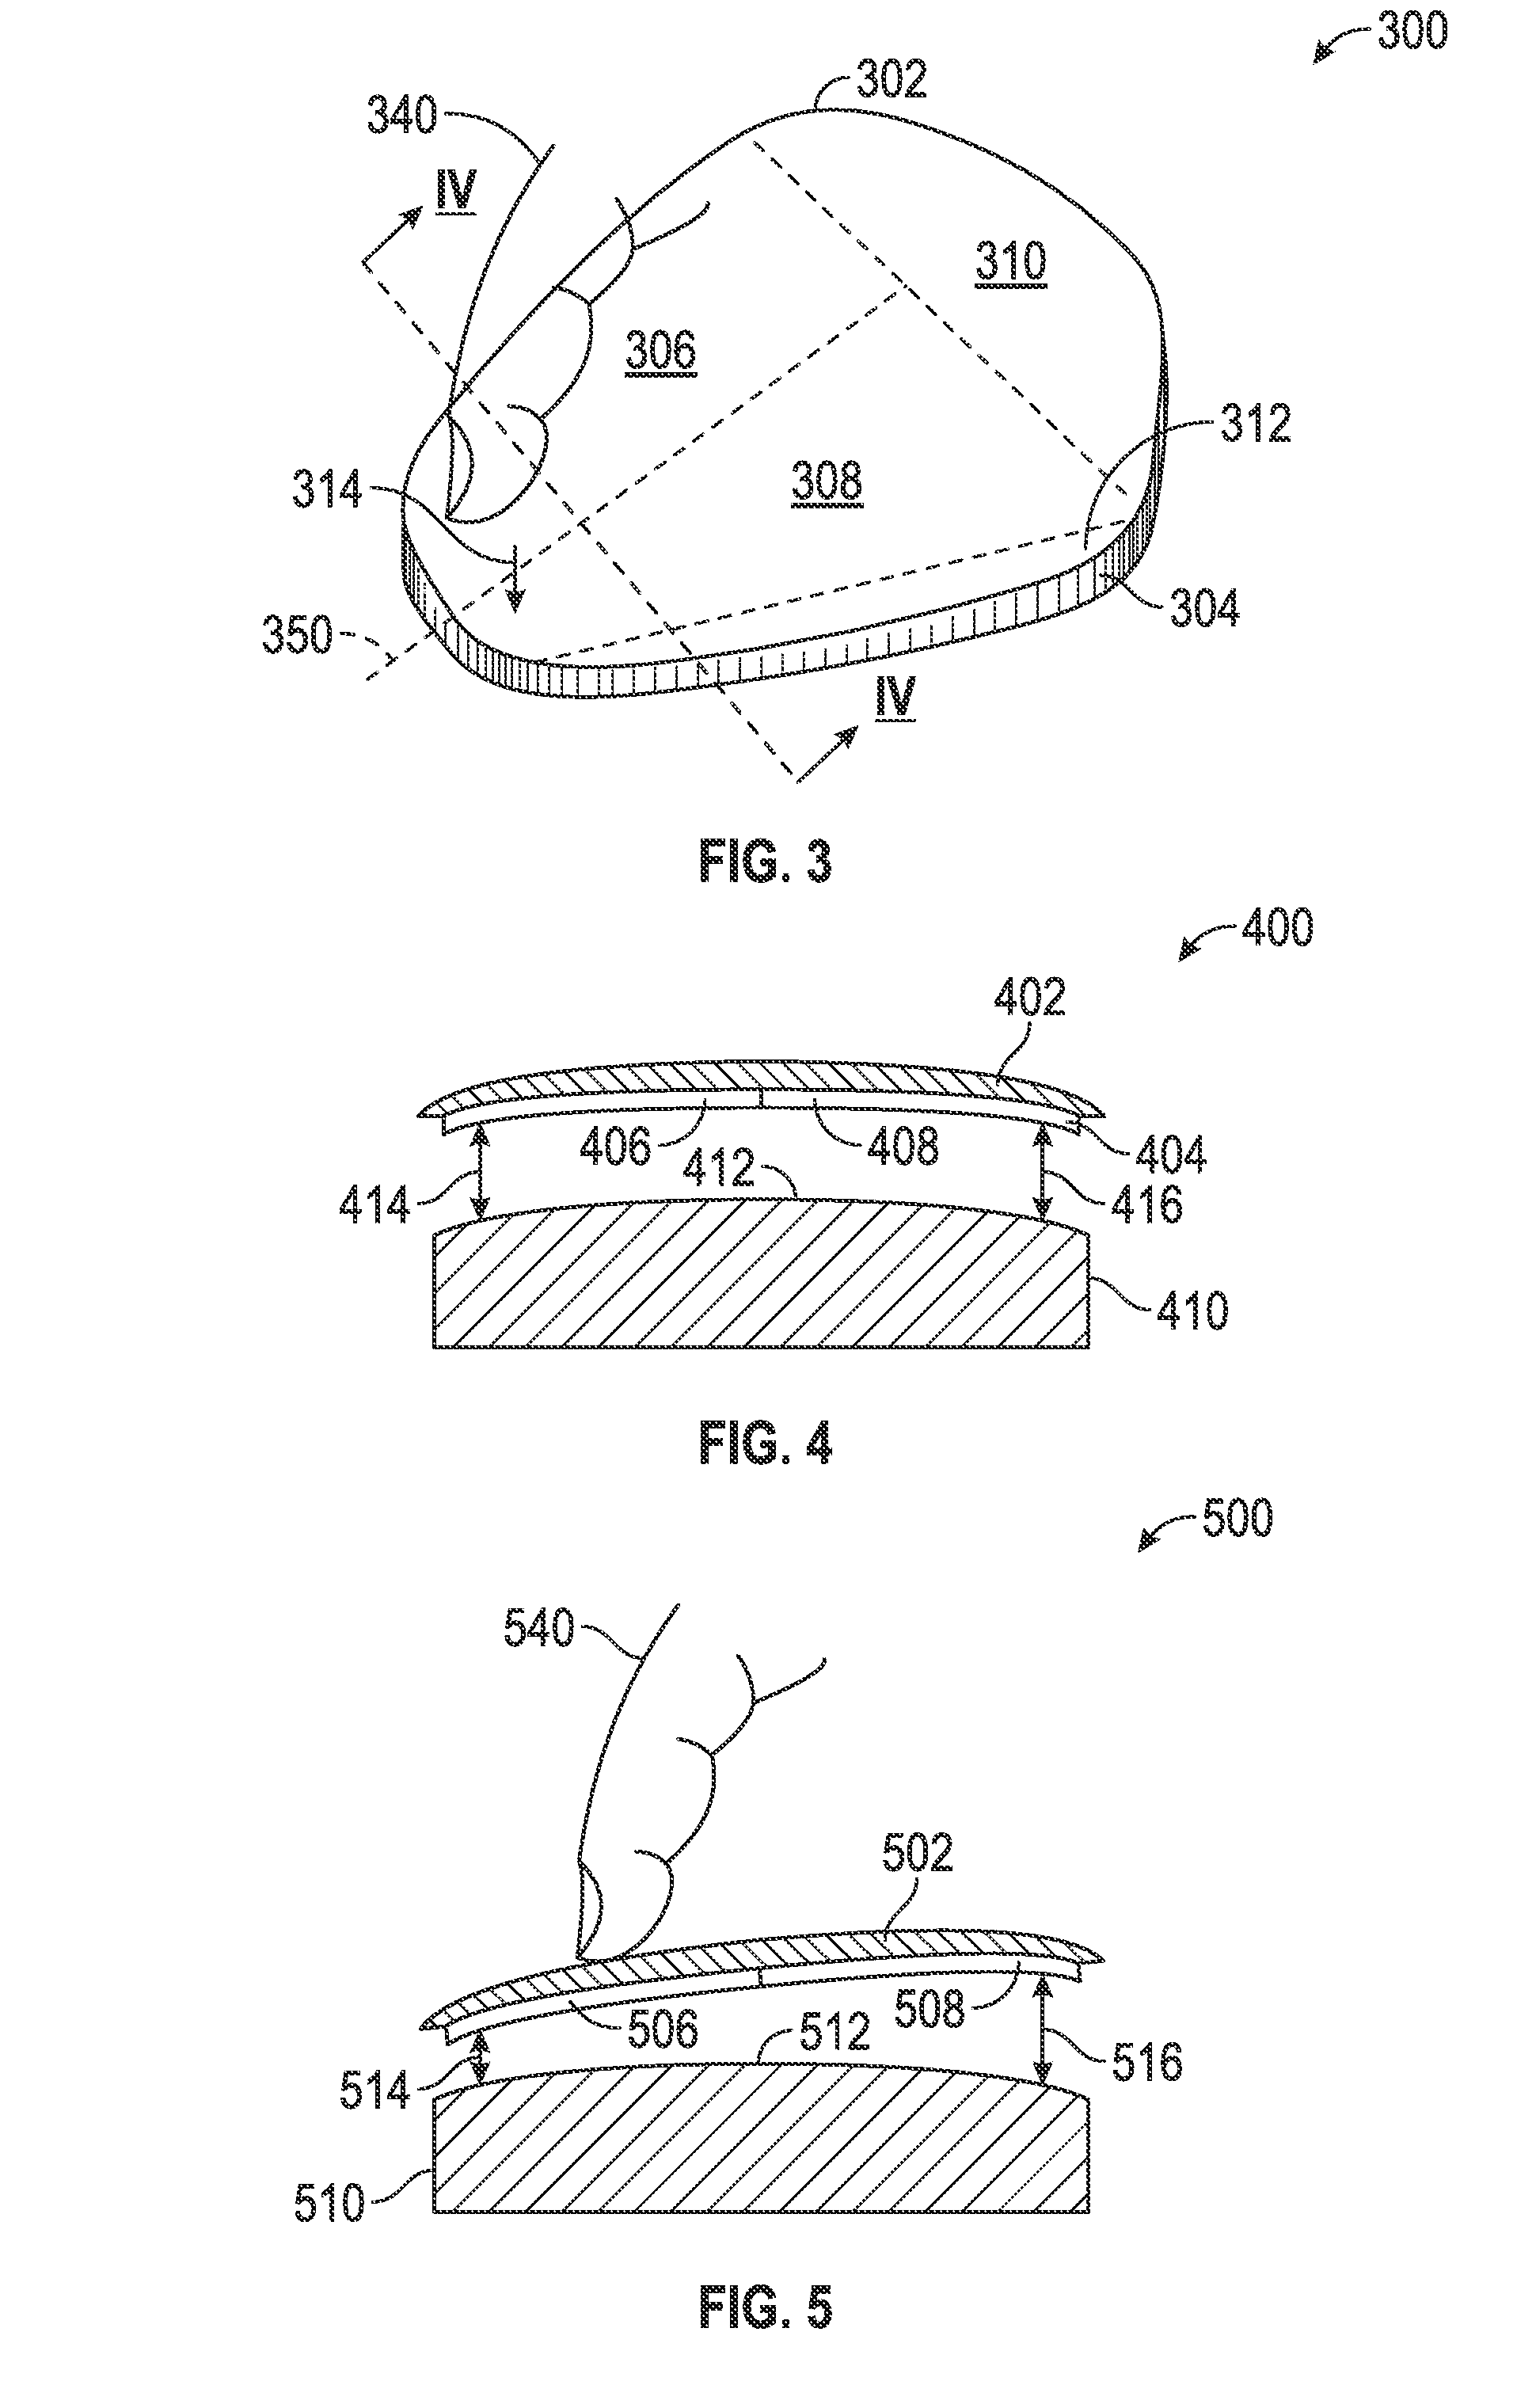 Device and method for disambiguating button presses on a capacitive sensing mouse